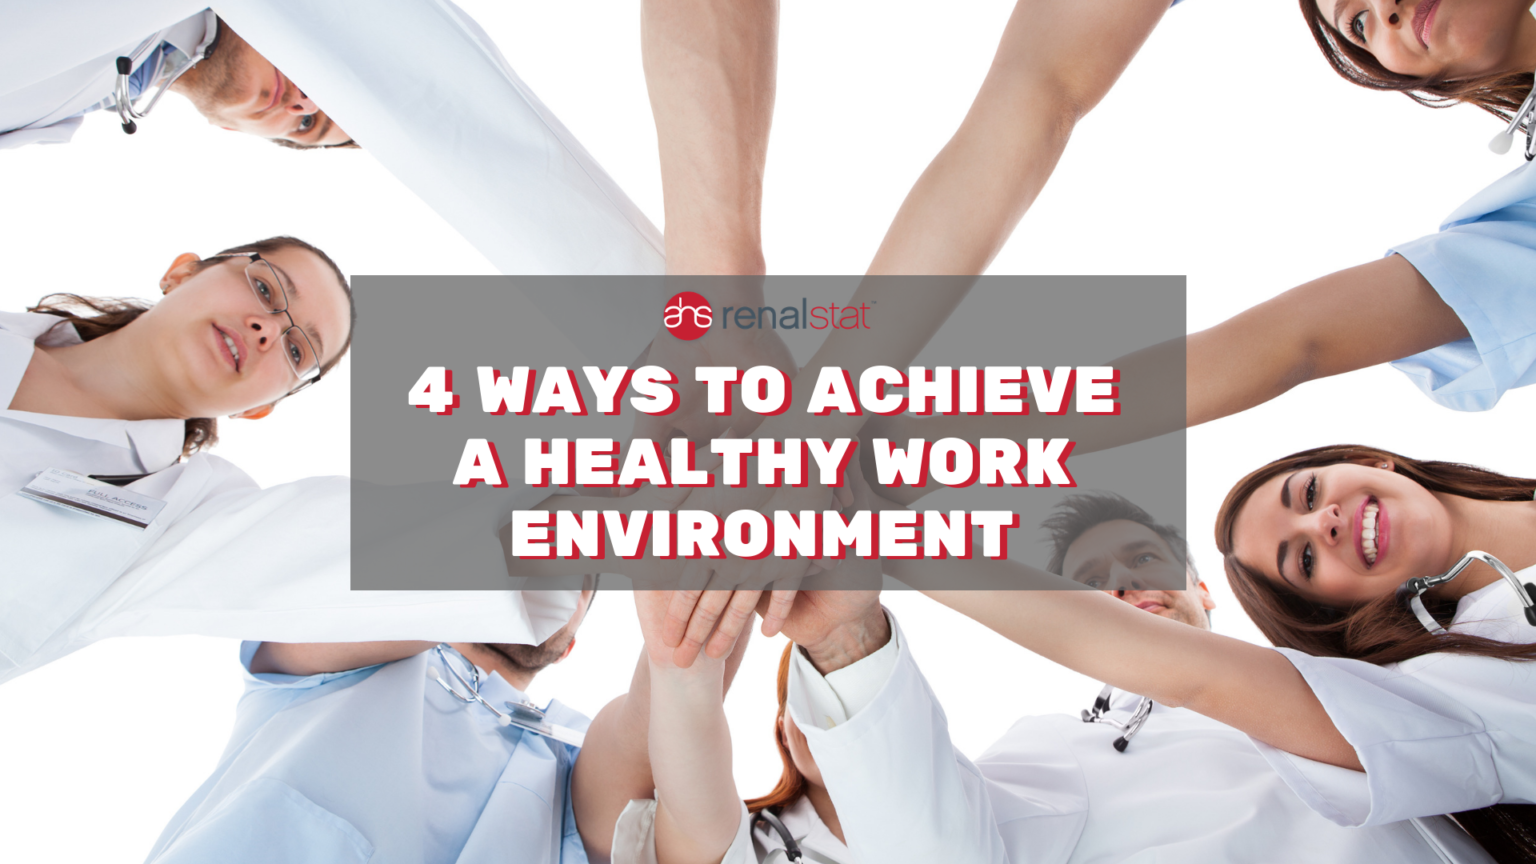 4 Ways To Achieve A Healthy Work Environment Ahs Renalstat